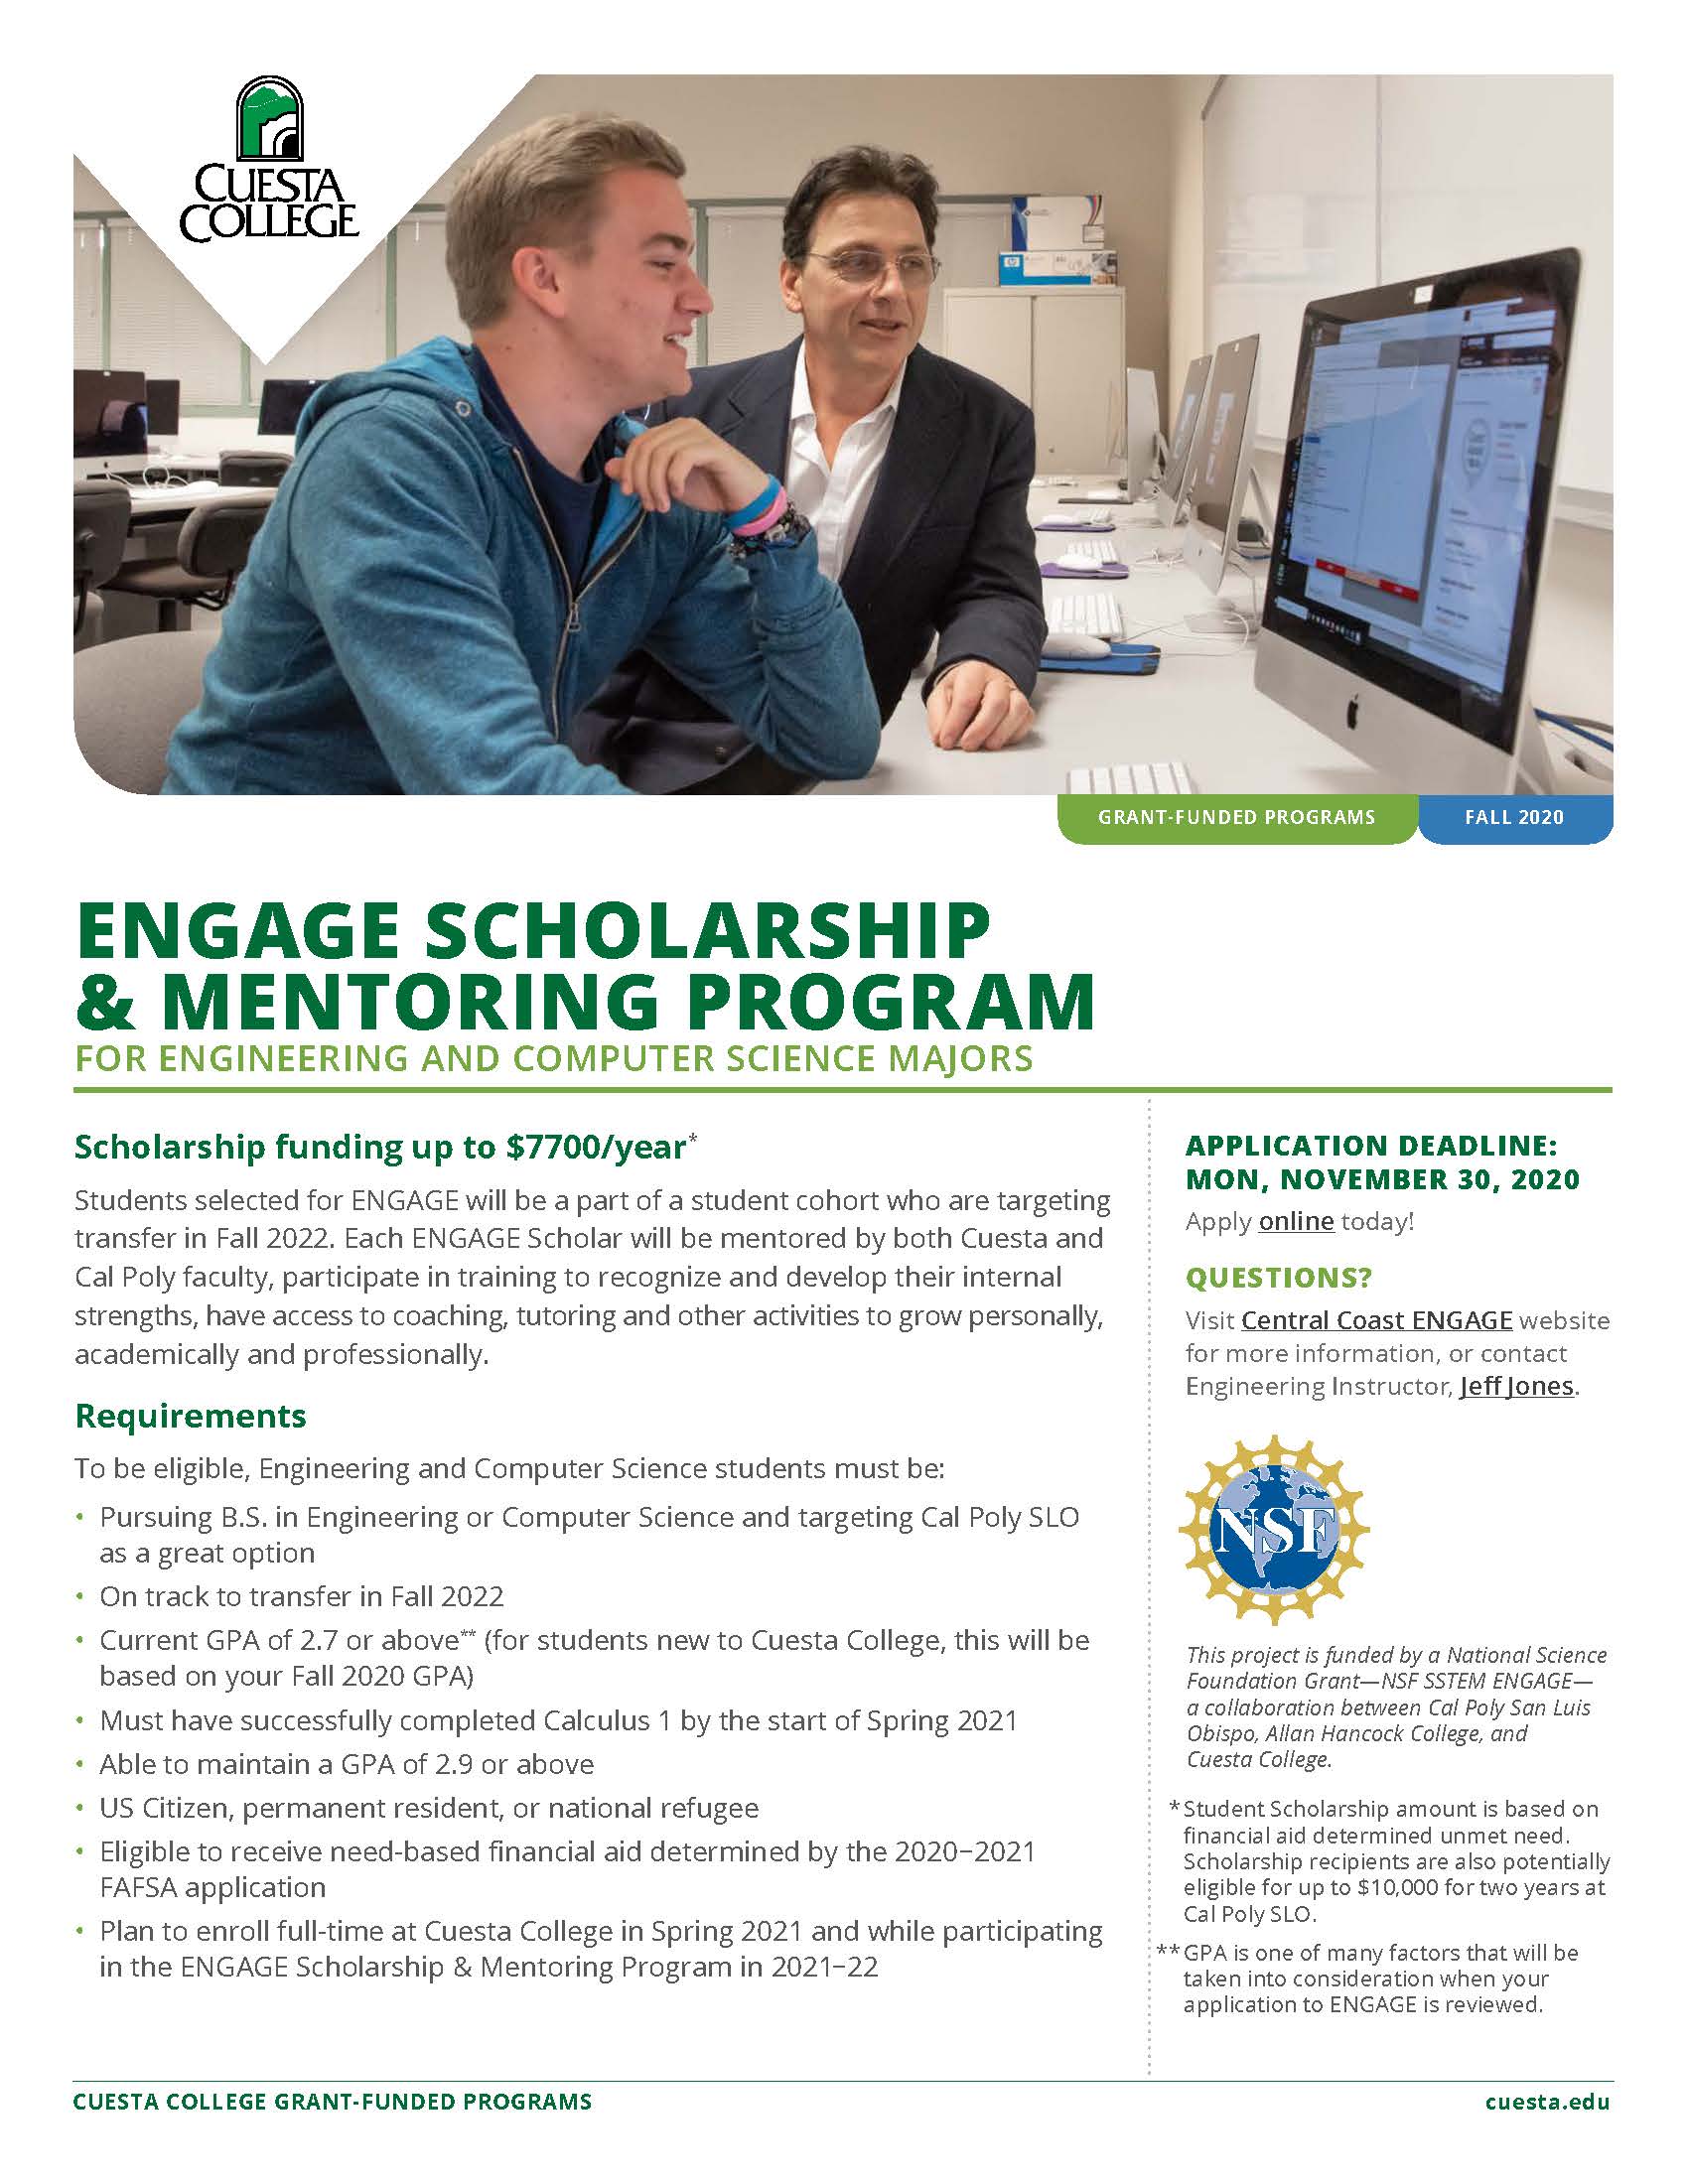 ENGAGE Scholarship and Mentoring Program Flyer